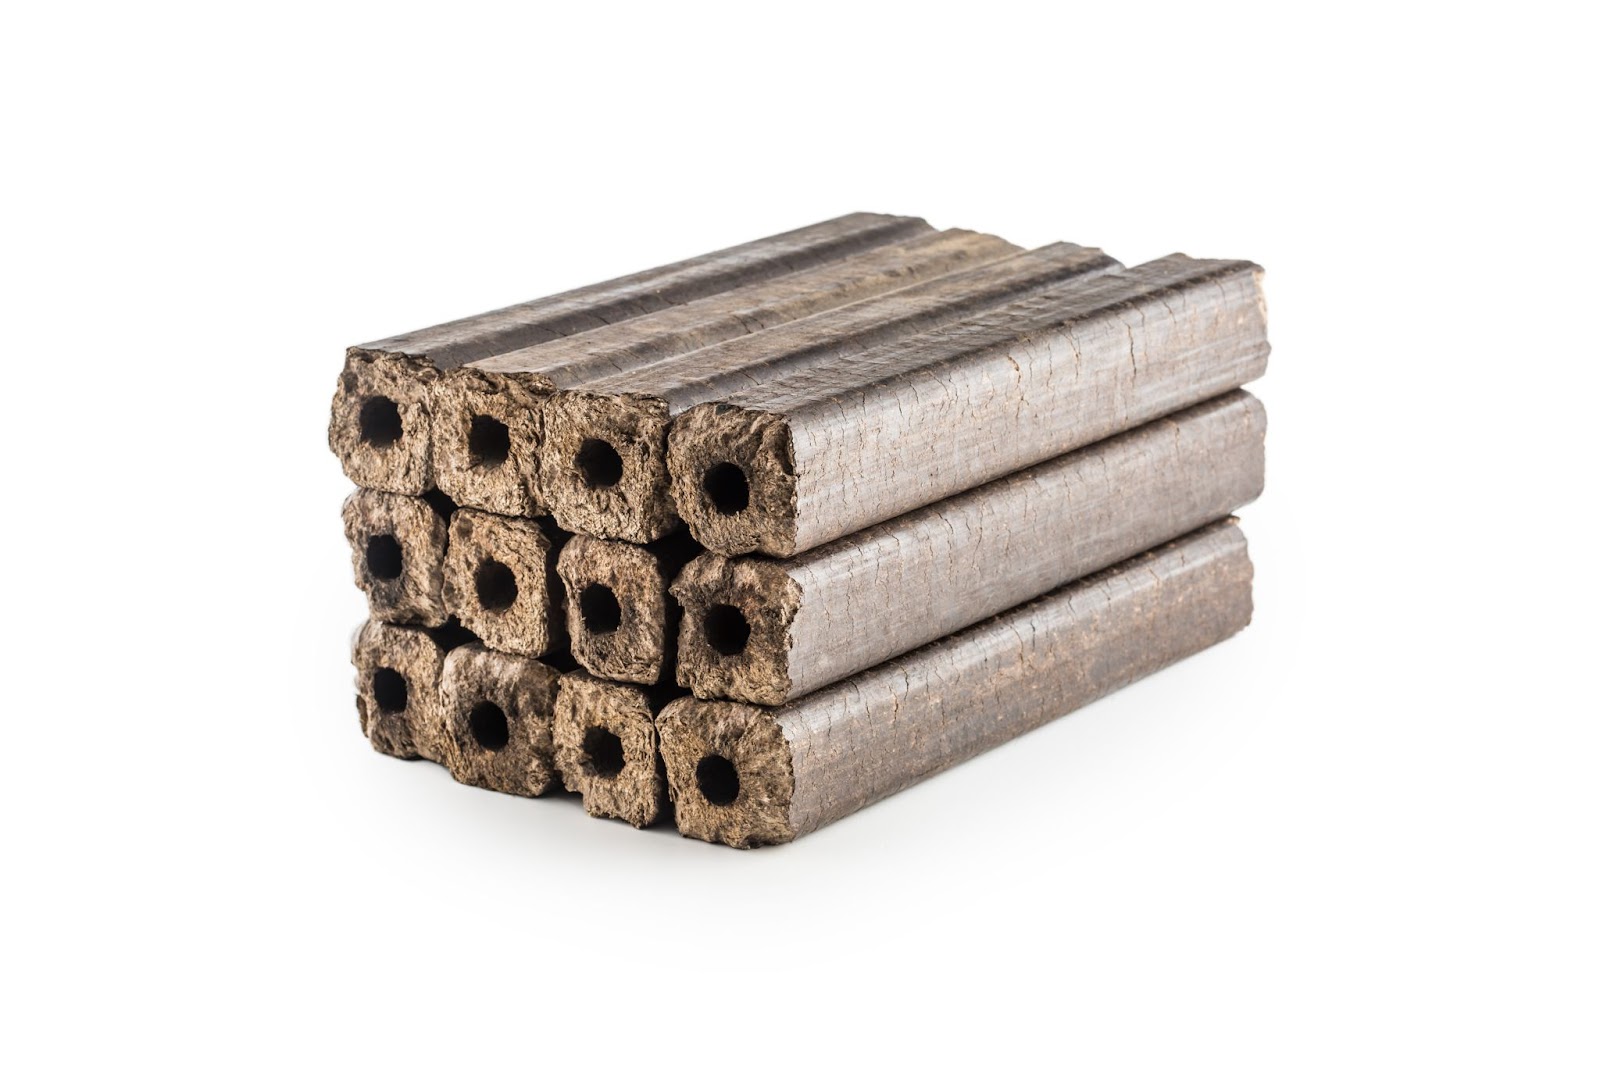 wooden-pressed-briquettes-pini-kay-from-biomass-white-isolated-background (2).jpg - 